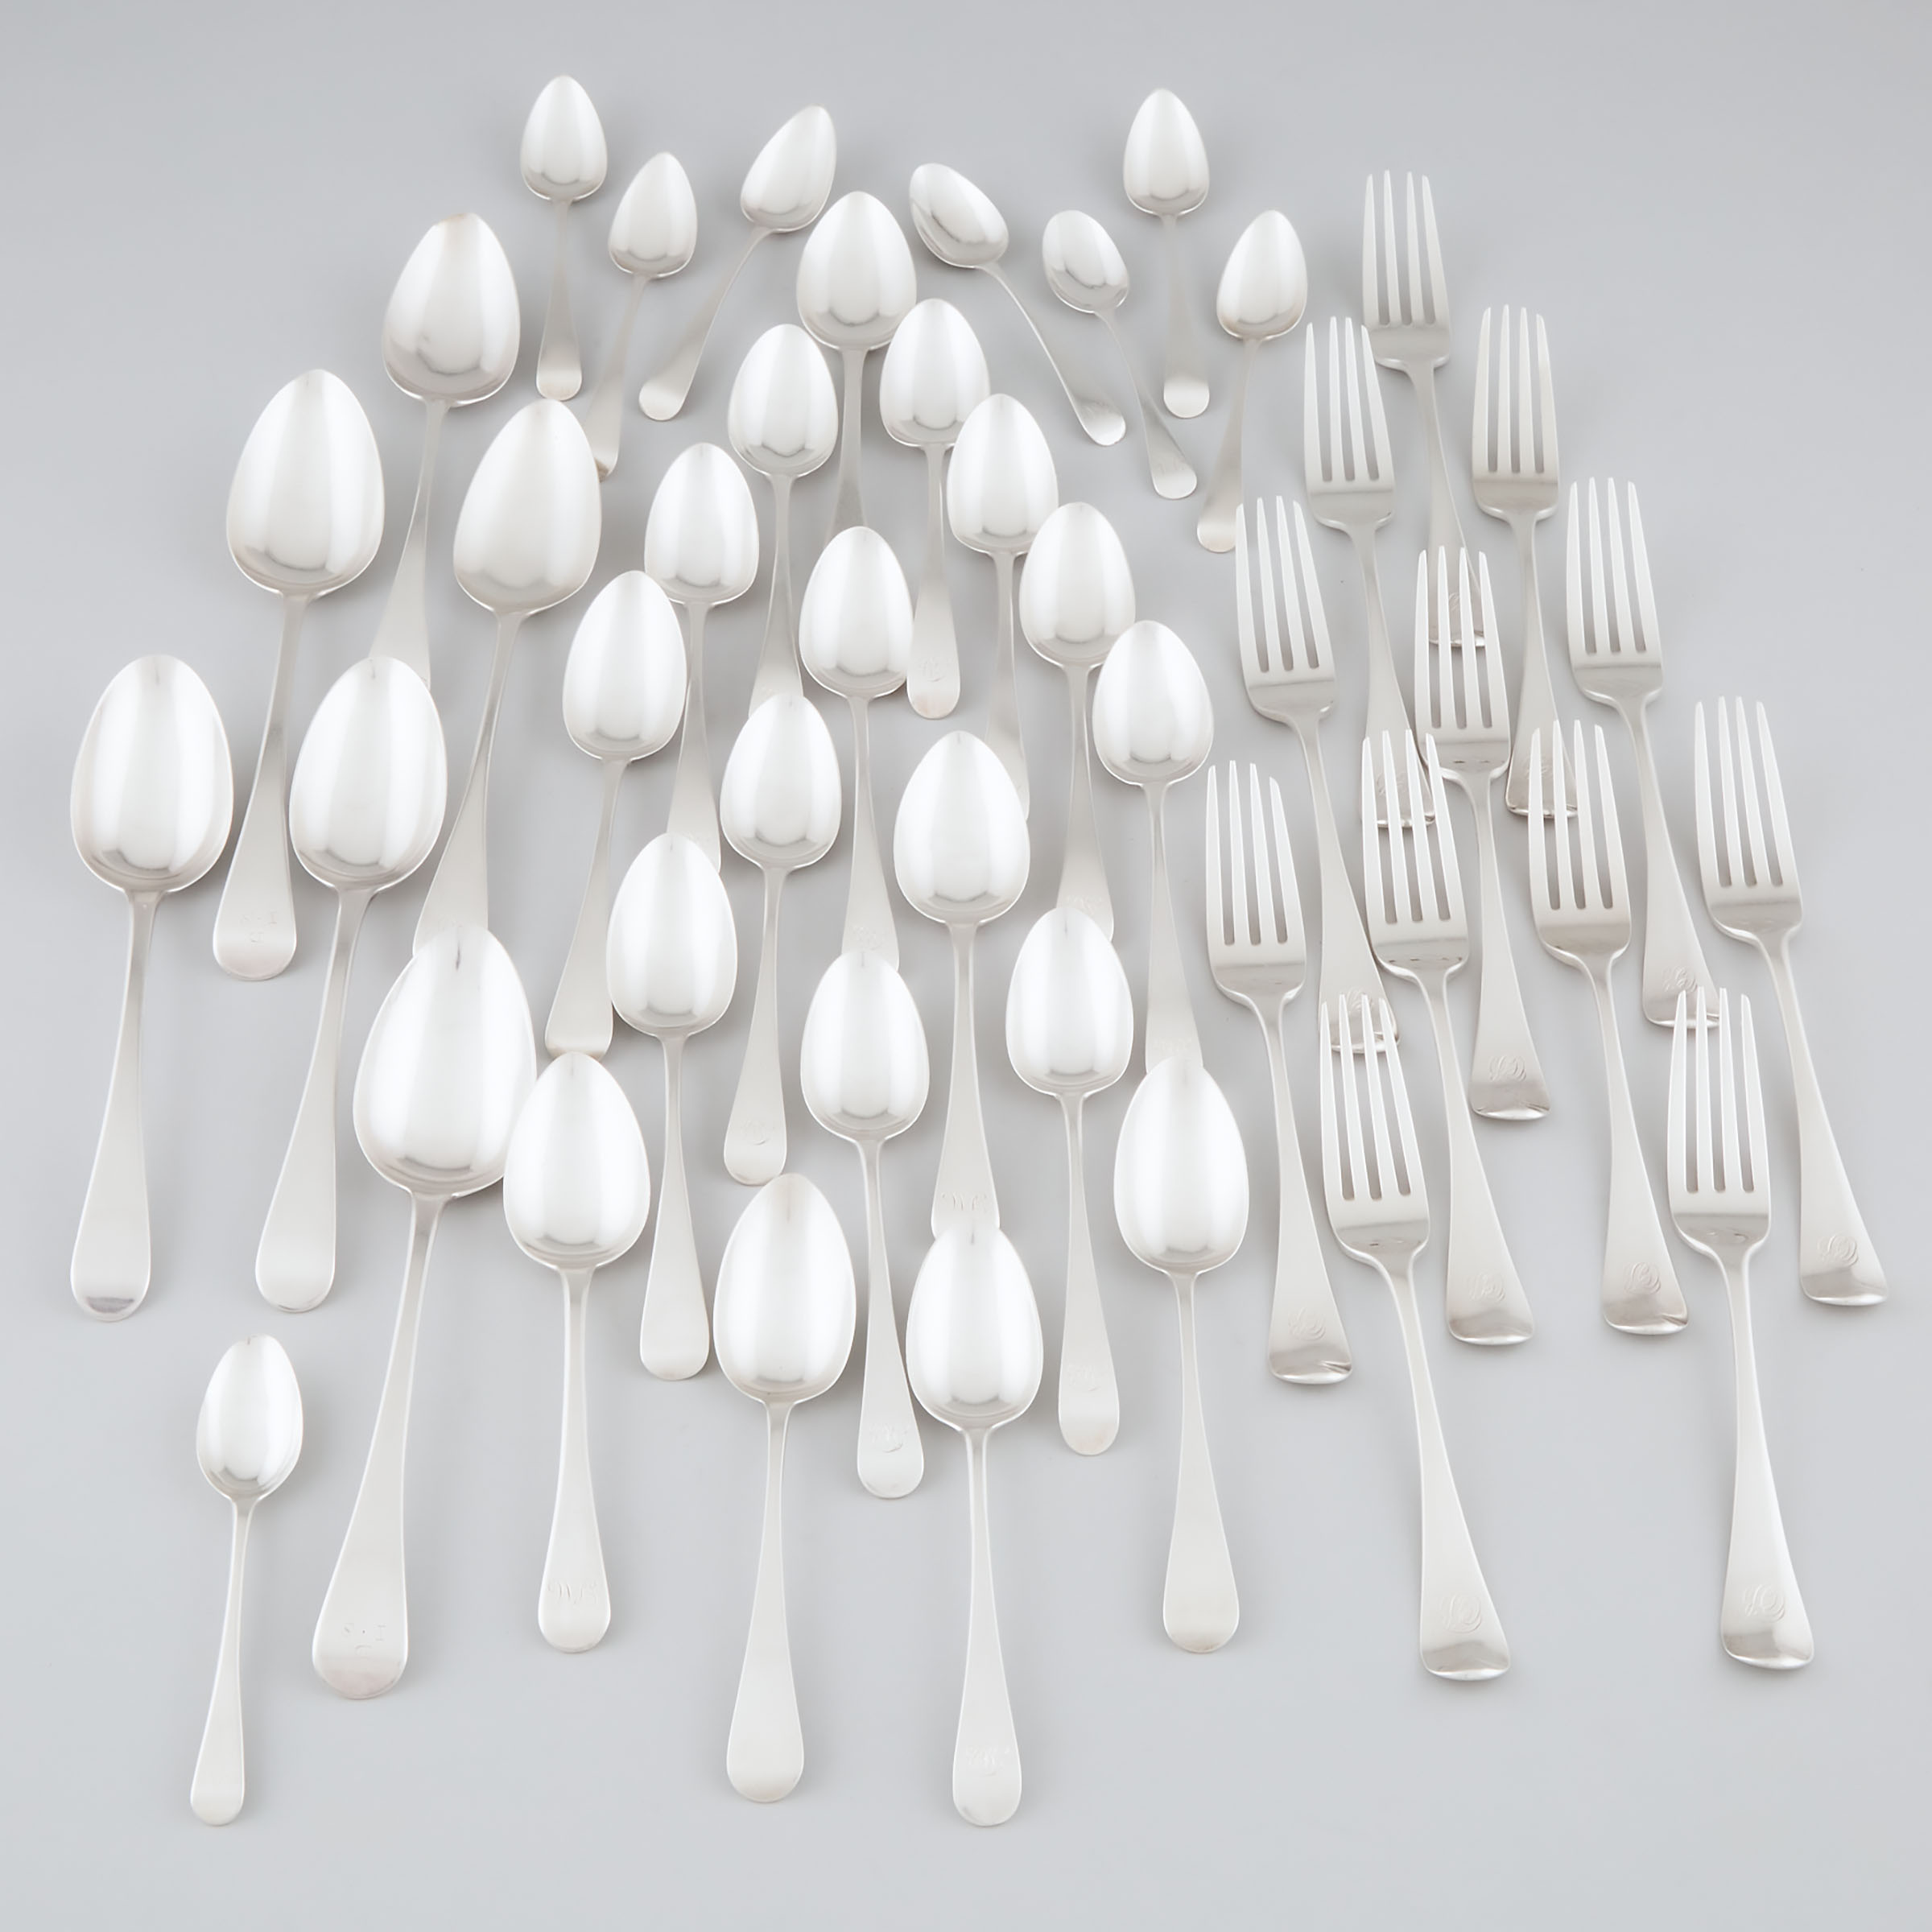 George III Silver Old English Pattern Flatware, London, late 18th/early 19th century